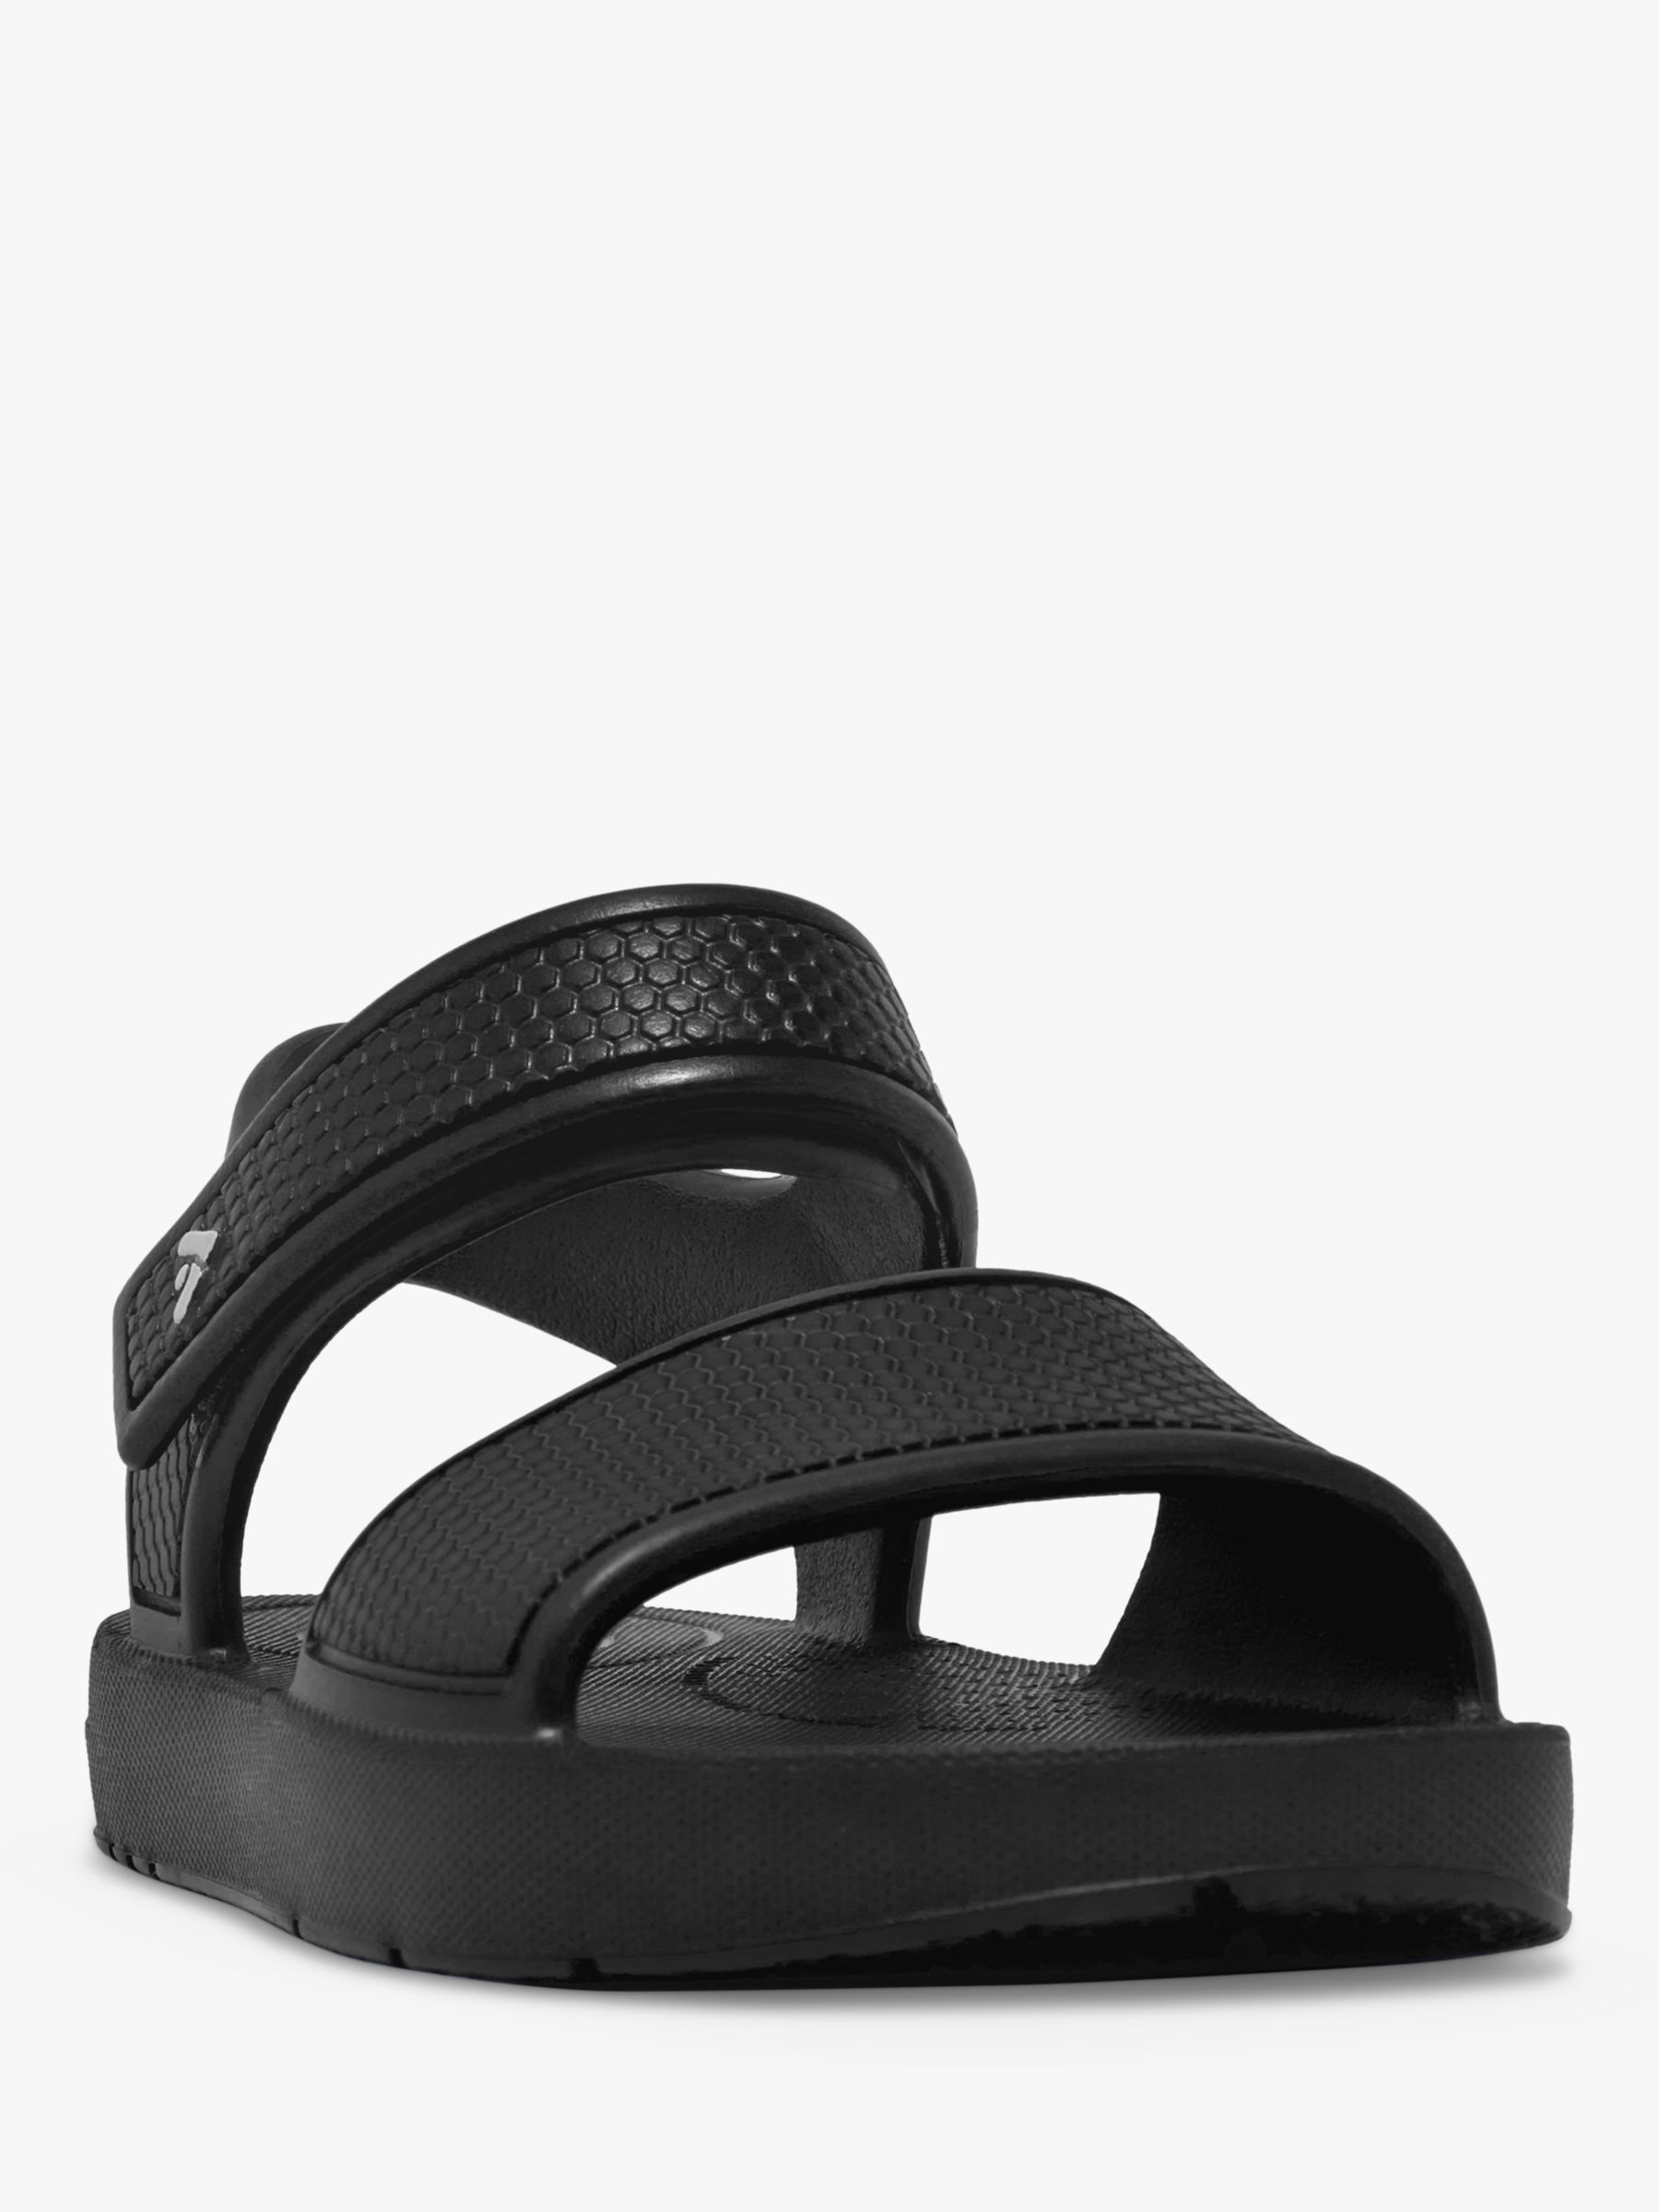 Buy FitFlop Kids' Iqushion Backstrap Pearlised Sandals Online at johnlewis.com